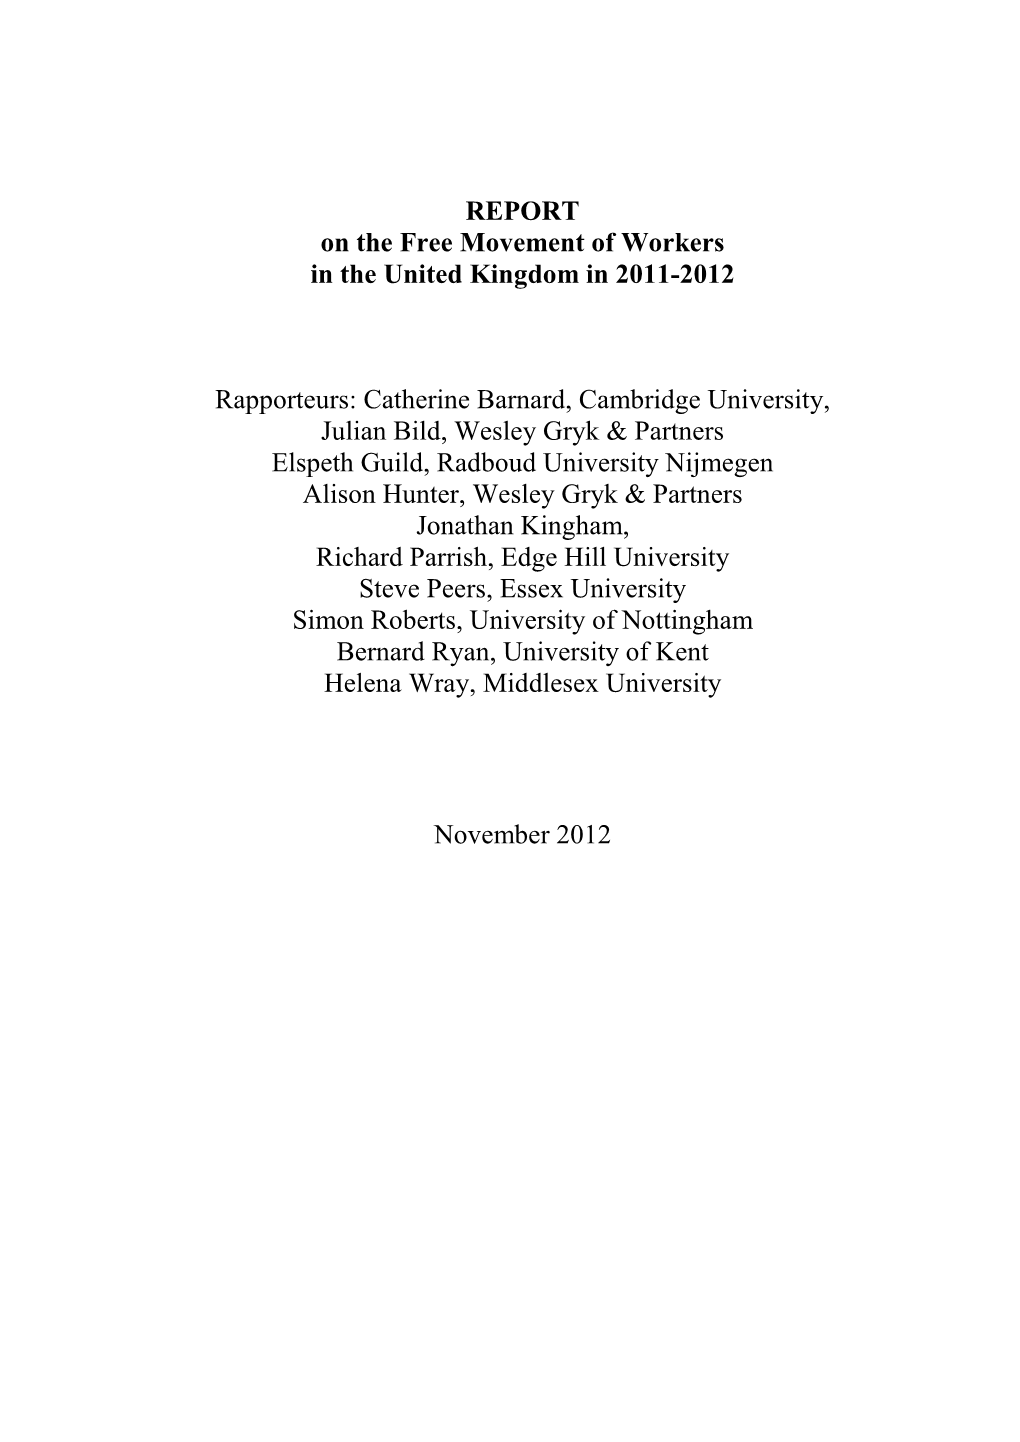 REPORT on the Free Movement of Workers in the United Kingdom in 2011-2012 Rapporteurs: Catherine Barnard, Cambridge University